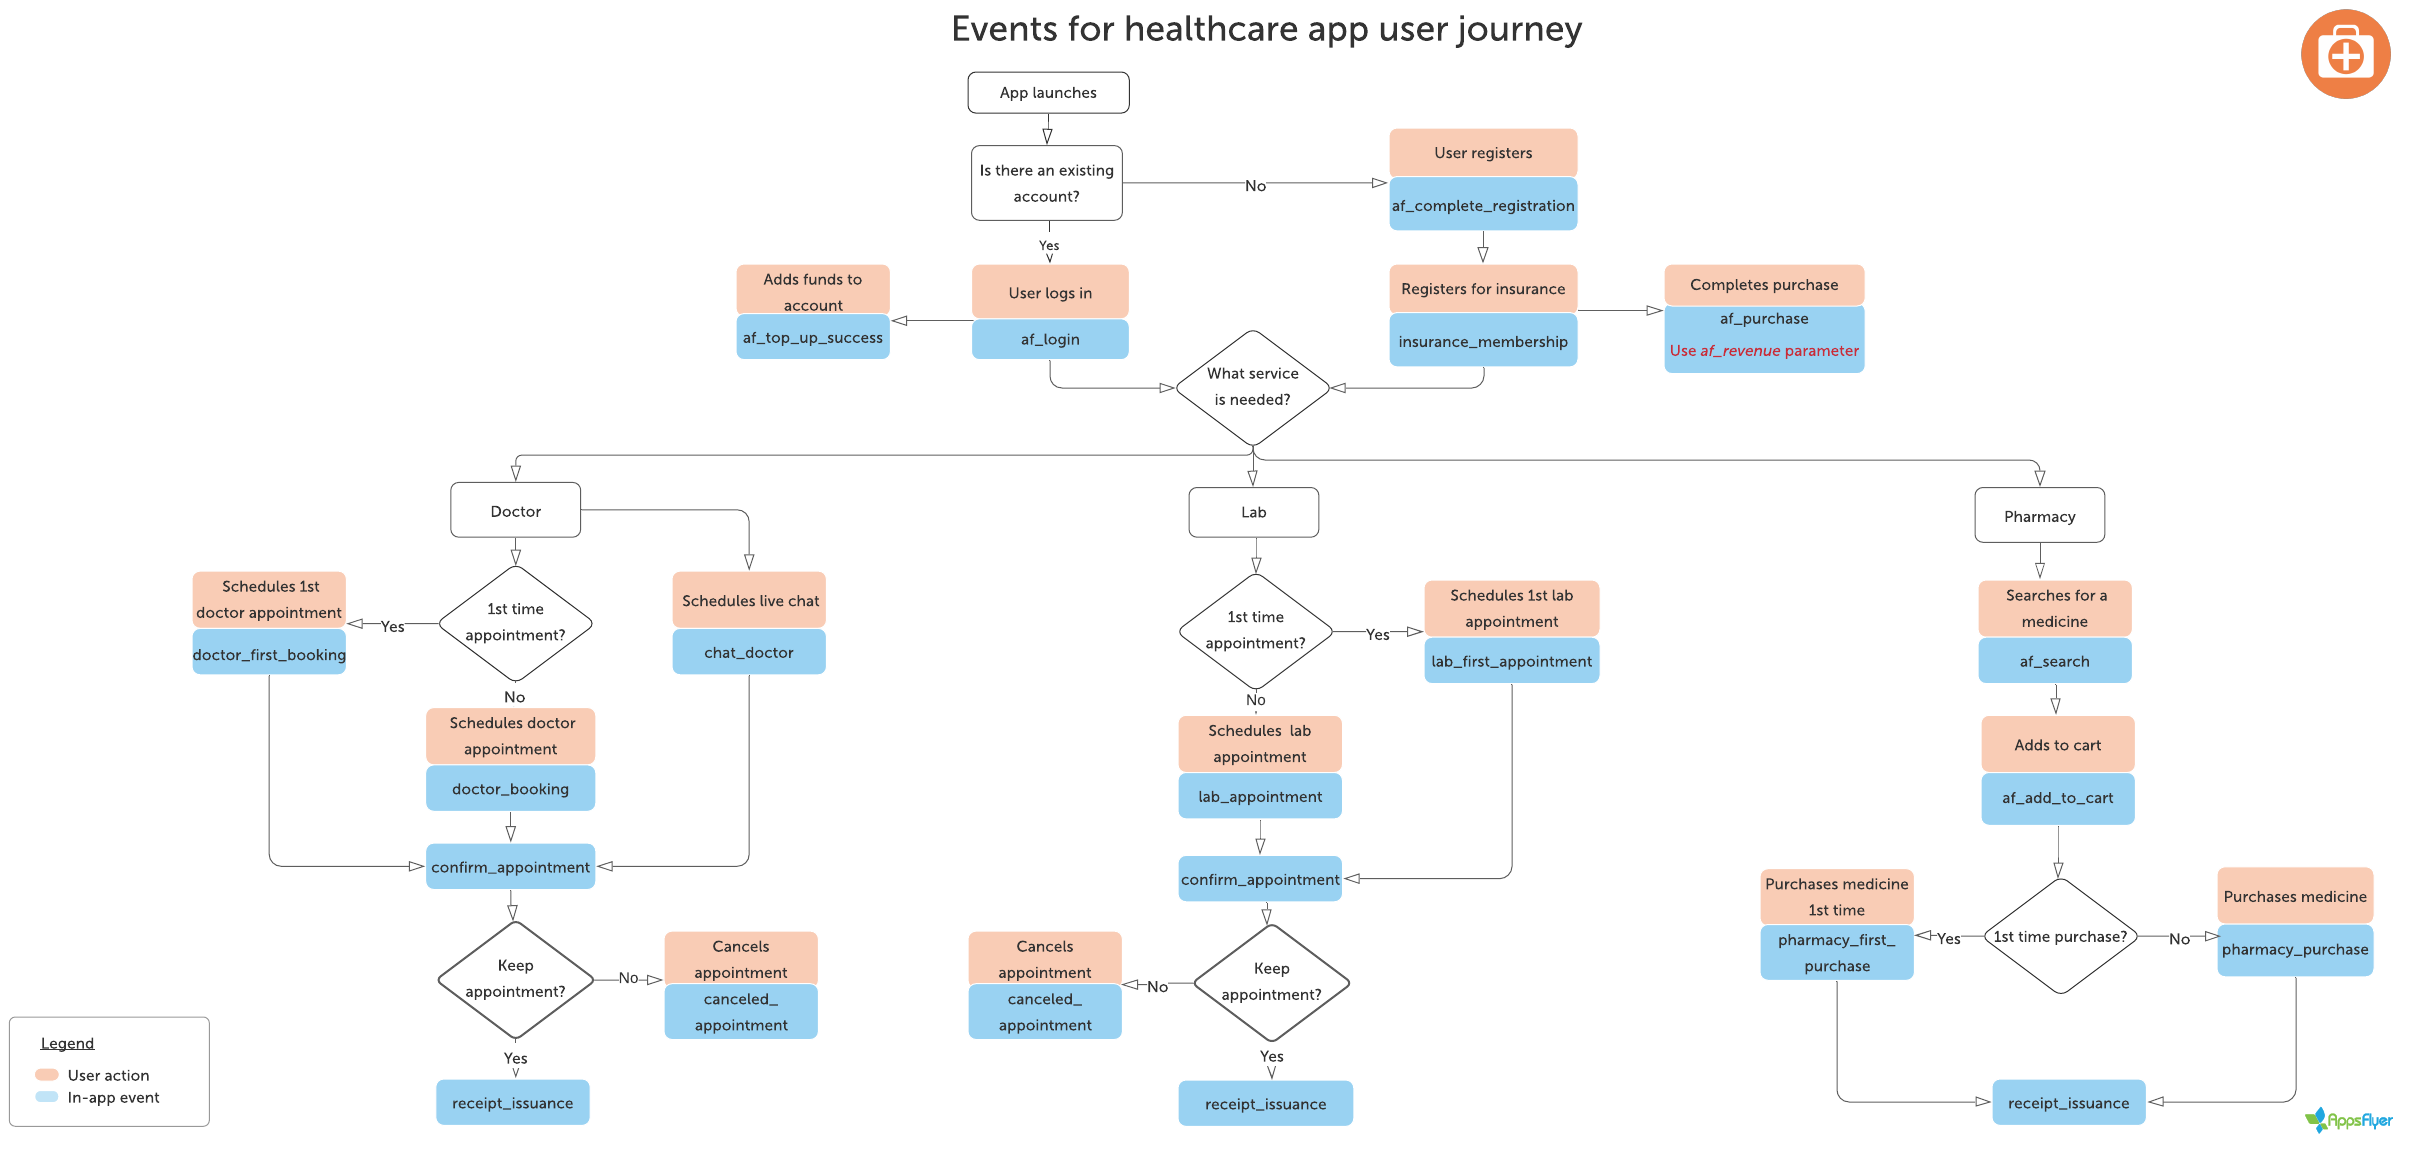 Flowchart_for_recommended_events healthcare_app_user_journey